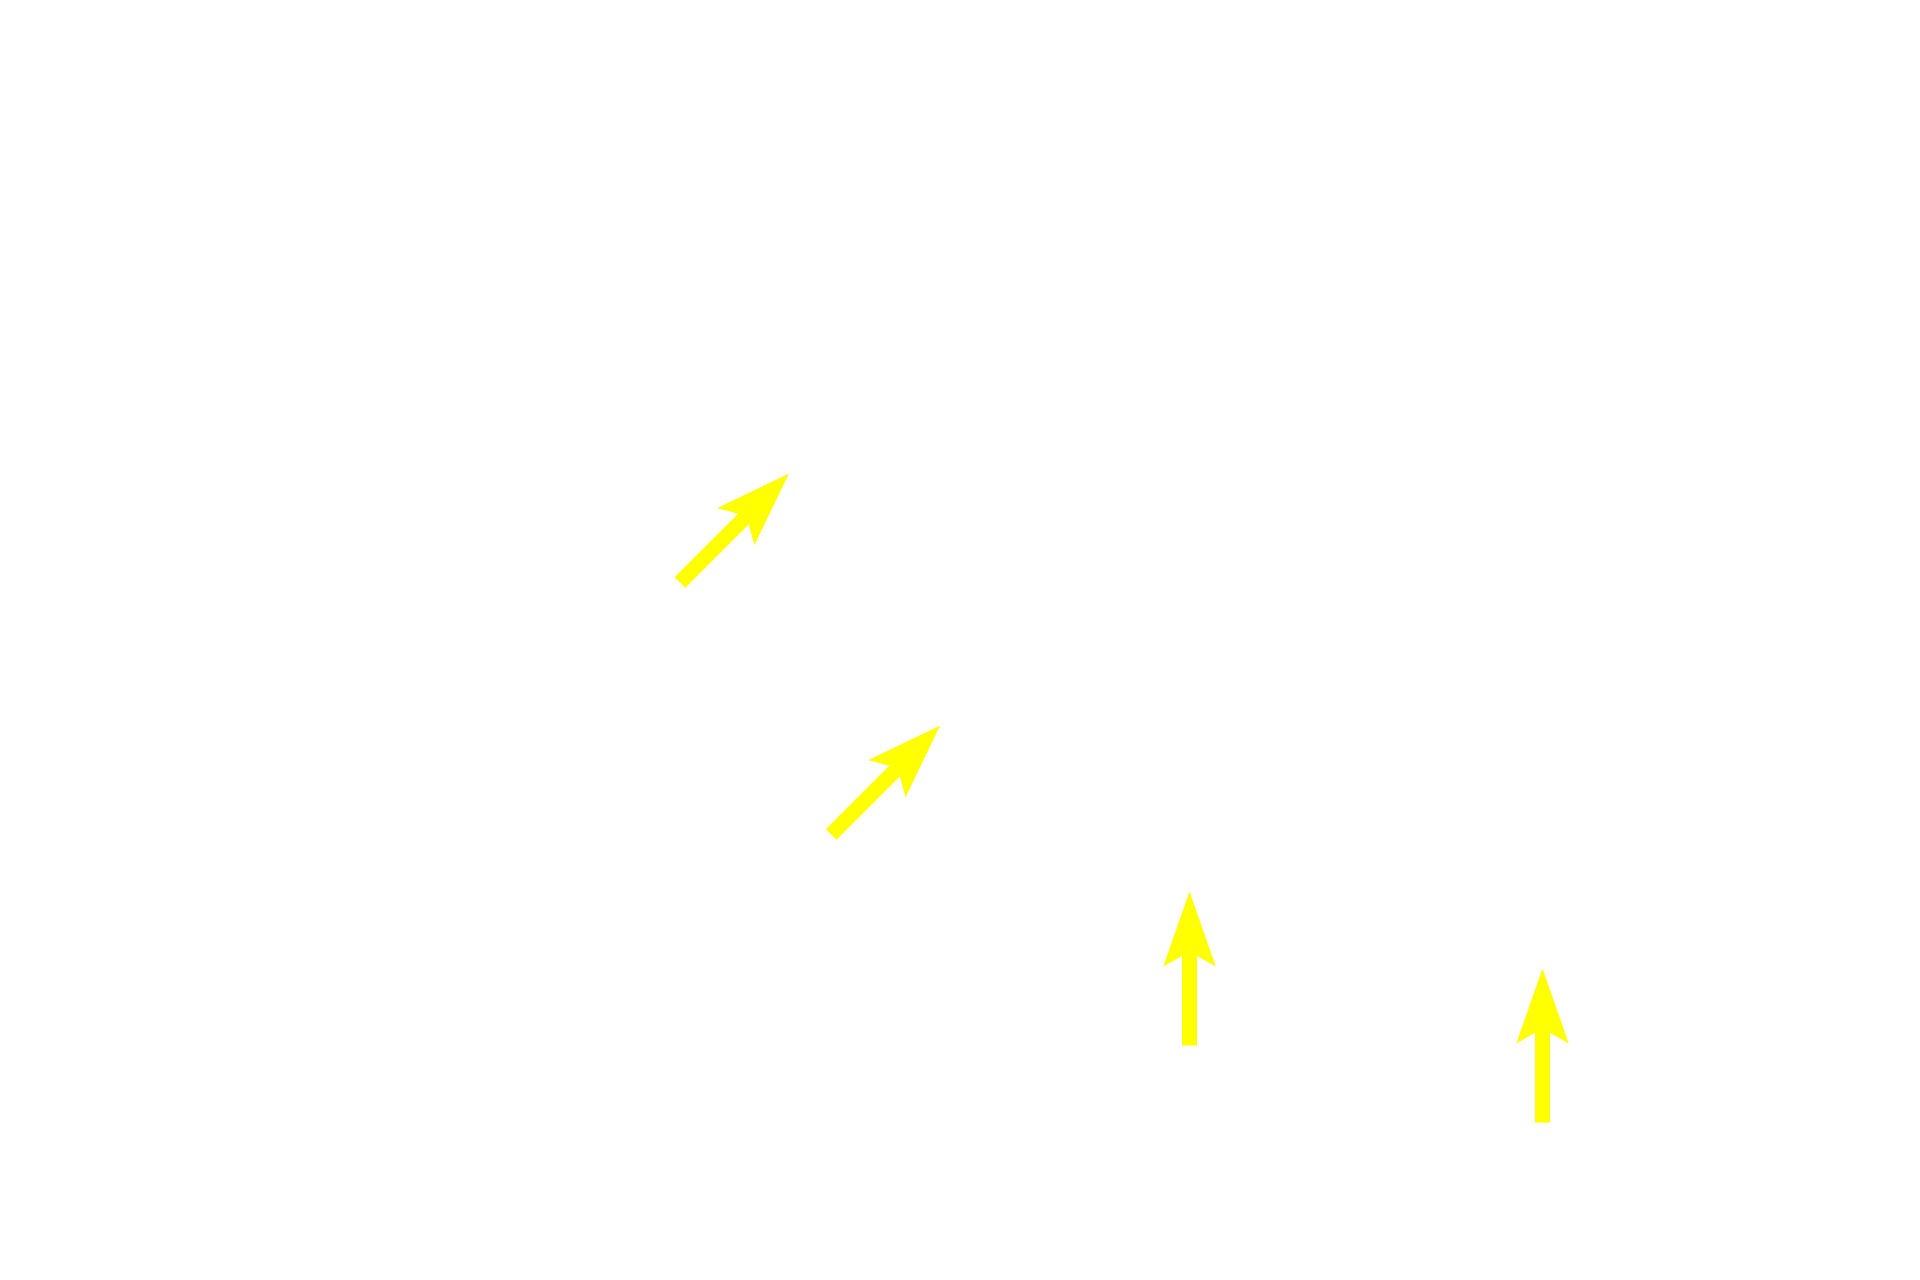 Central arteriole <p>The central arteriole and its relationship to the PALS is seen at higher magnification (area indicated by the yellow frame in the inset).  For most of its course, the central arteriole is surrounded by PALS.  Frequently, lymphoid nodules, B-dependent areas that form part of white pulp, develop within the PALS, causing the central arteriole to be eccentrically located.  A germinal center is just beginning to form.  200x</p>
